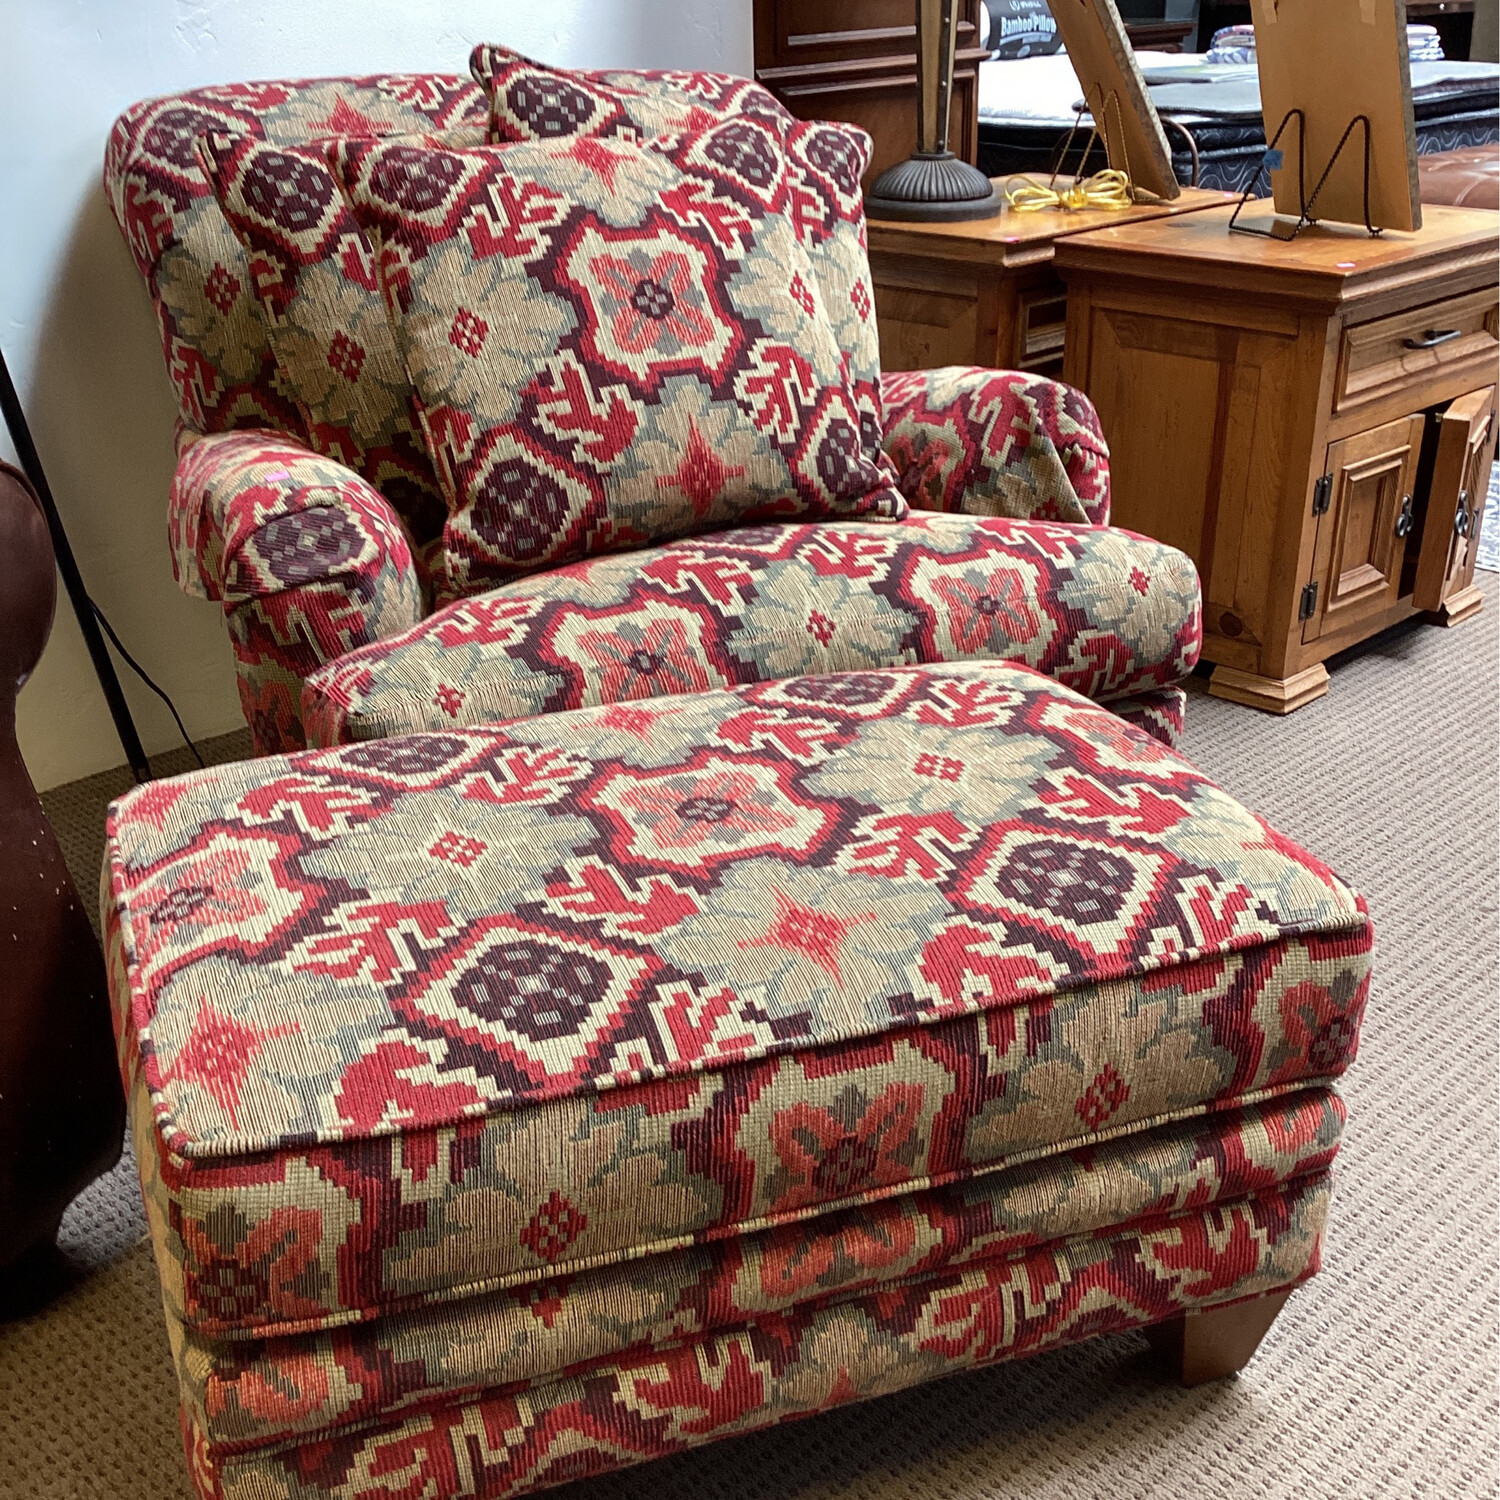 Large Red & Tan Upholstered Chair w/Ottoman